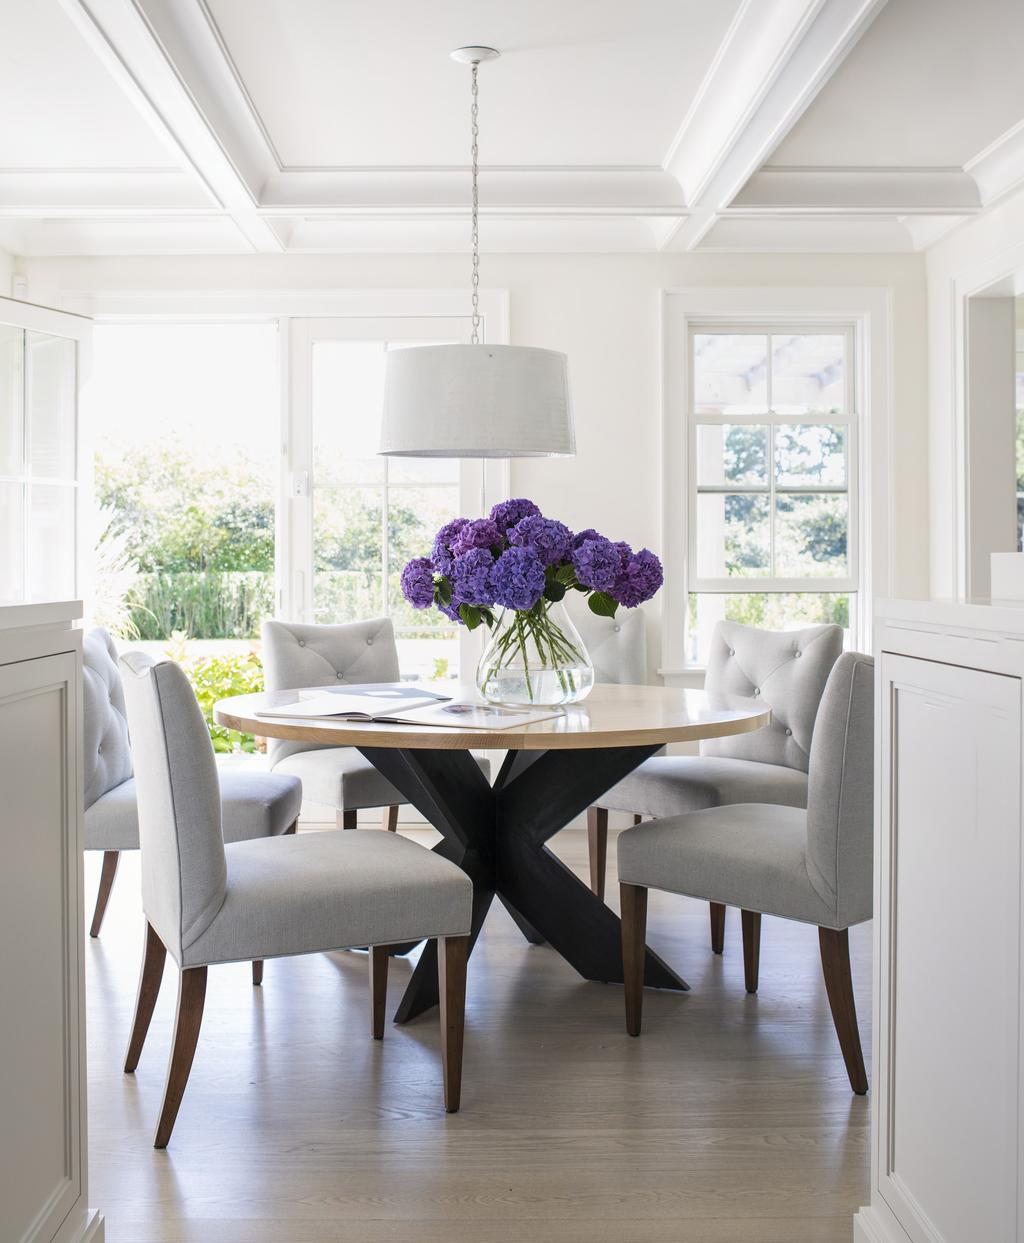 Dining room Tufted chairs by Charles Stewart Company gather around a custom-designed dining room table with a dramatic black X-base.